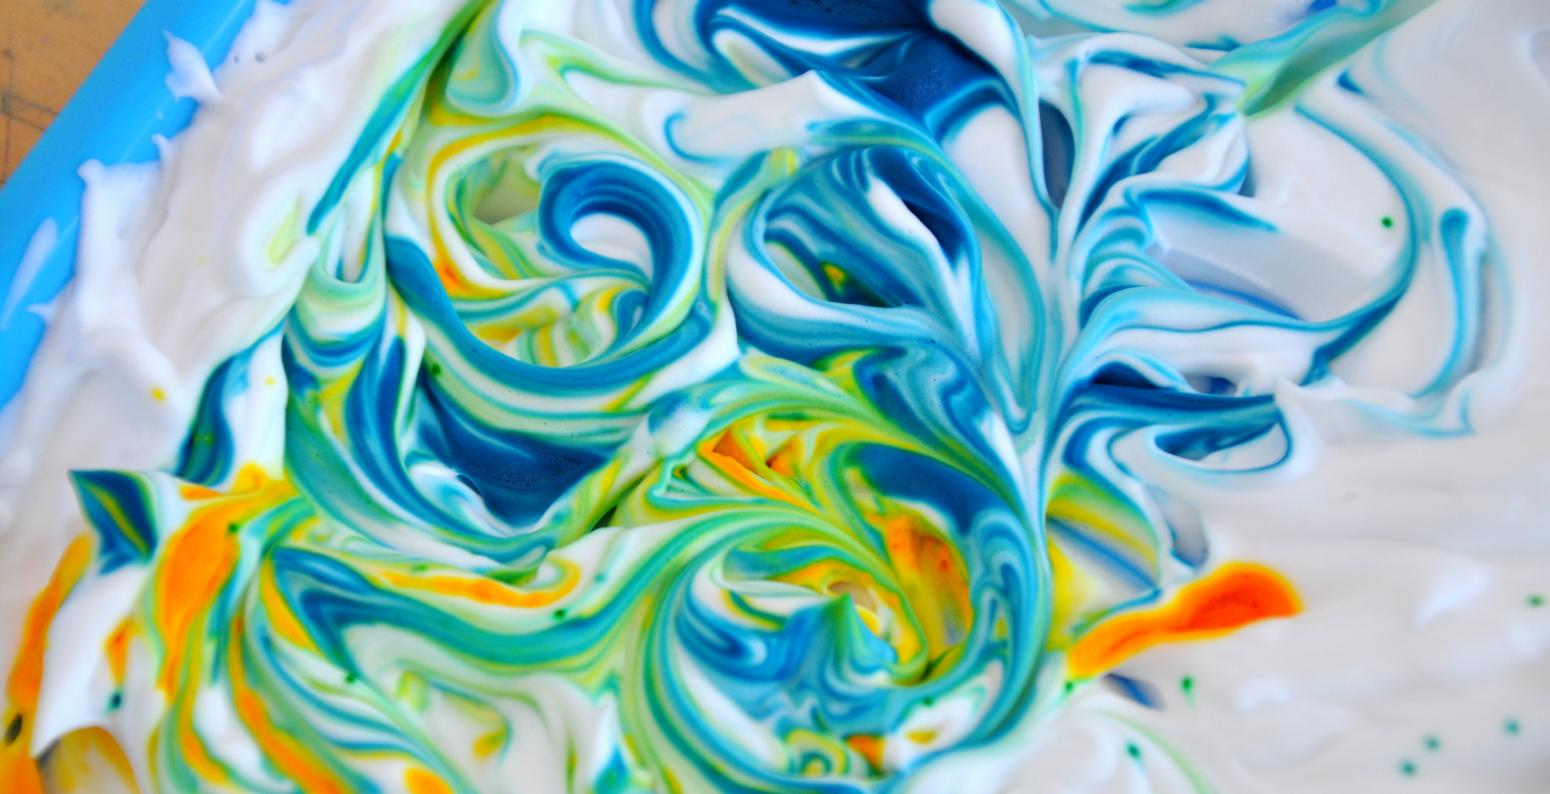 Blue and yellow swirls of color within white shaving cream.